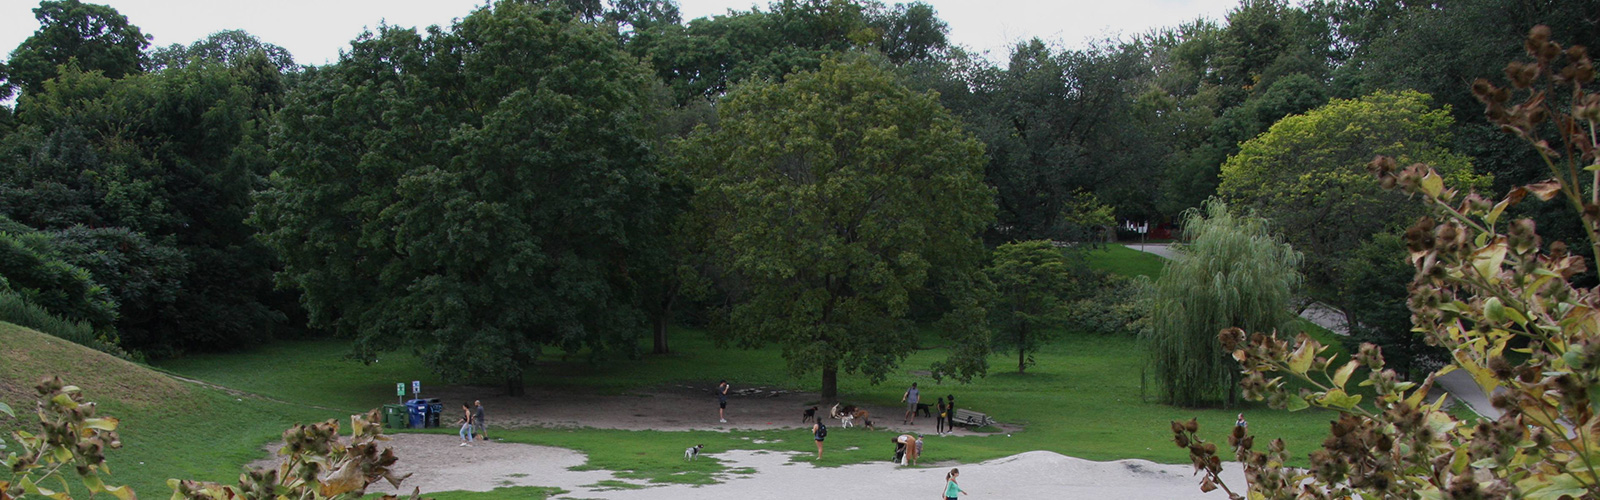 Taken from top of hilll in Trinity Bellwoods Park overlooking the "dogbowl", an off-leash dog park. Numerous people are walking and standing around while dogs play and run around. Area is surrounded by lush trees and other greenery.